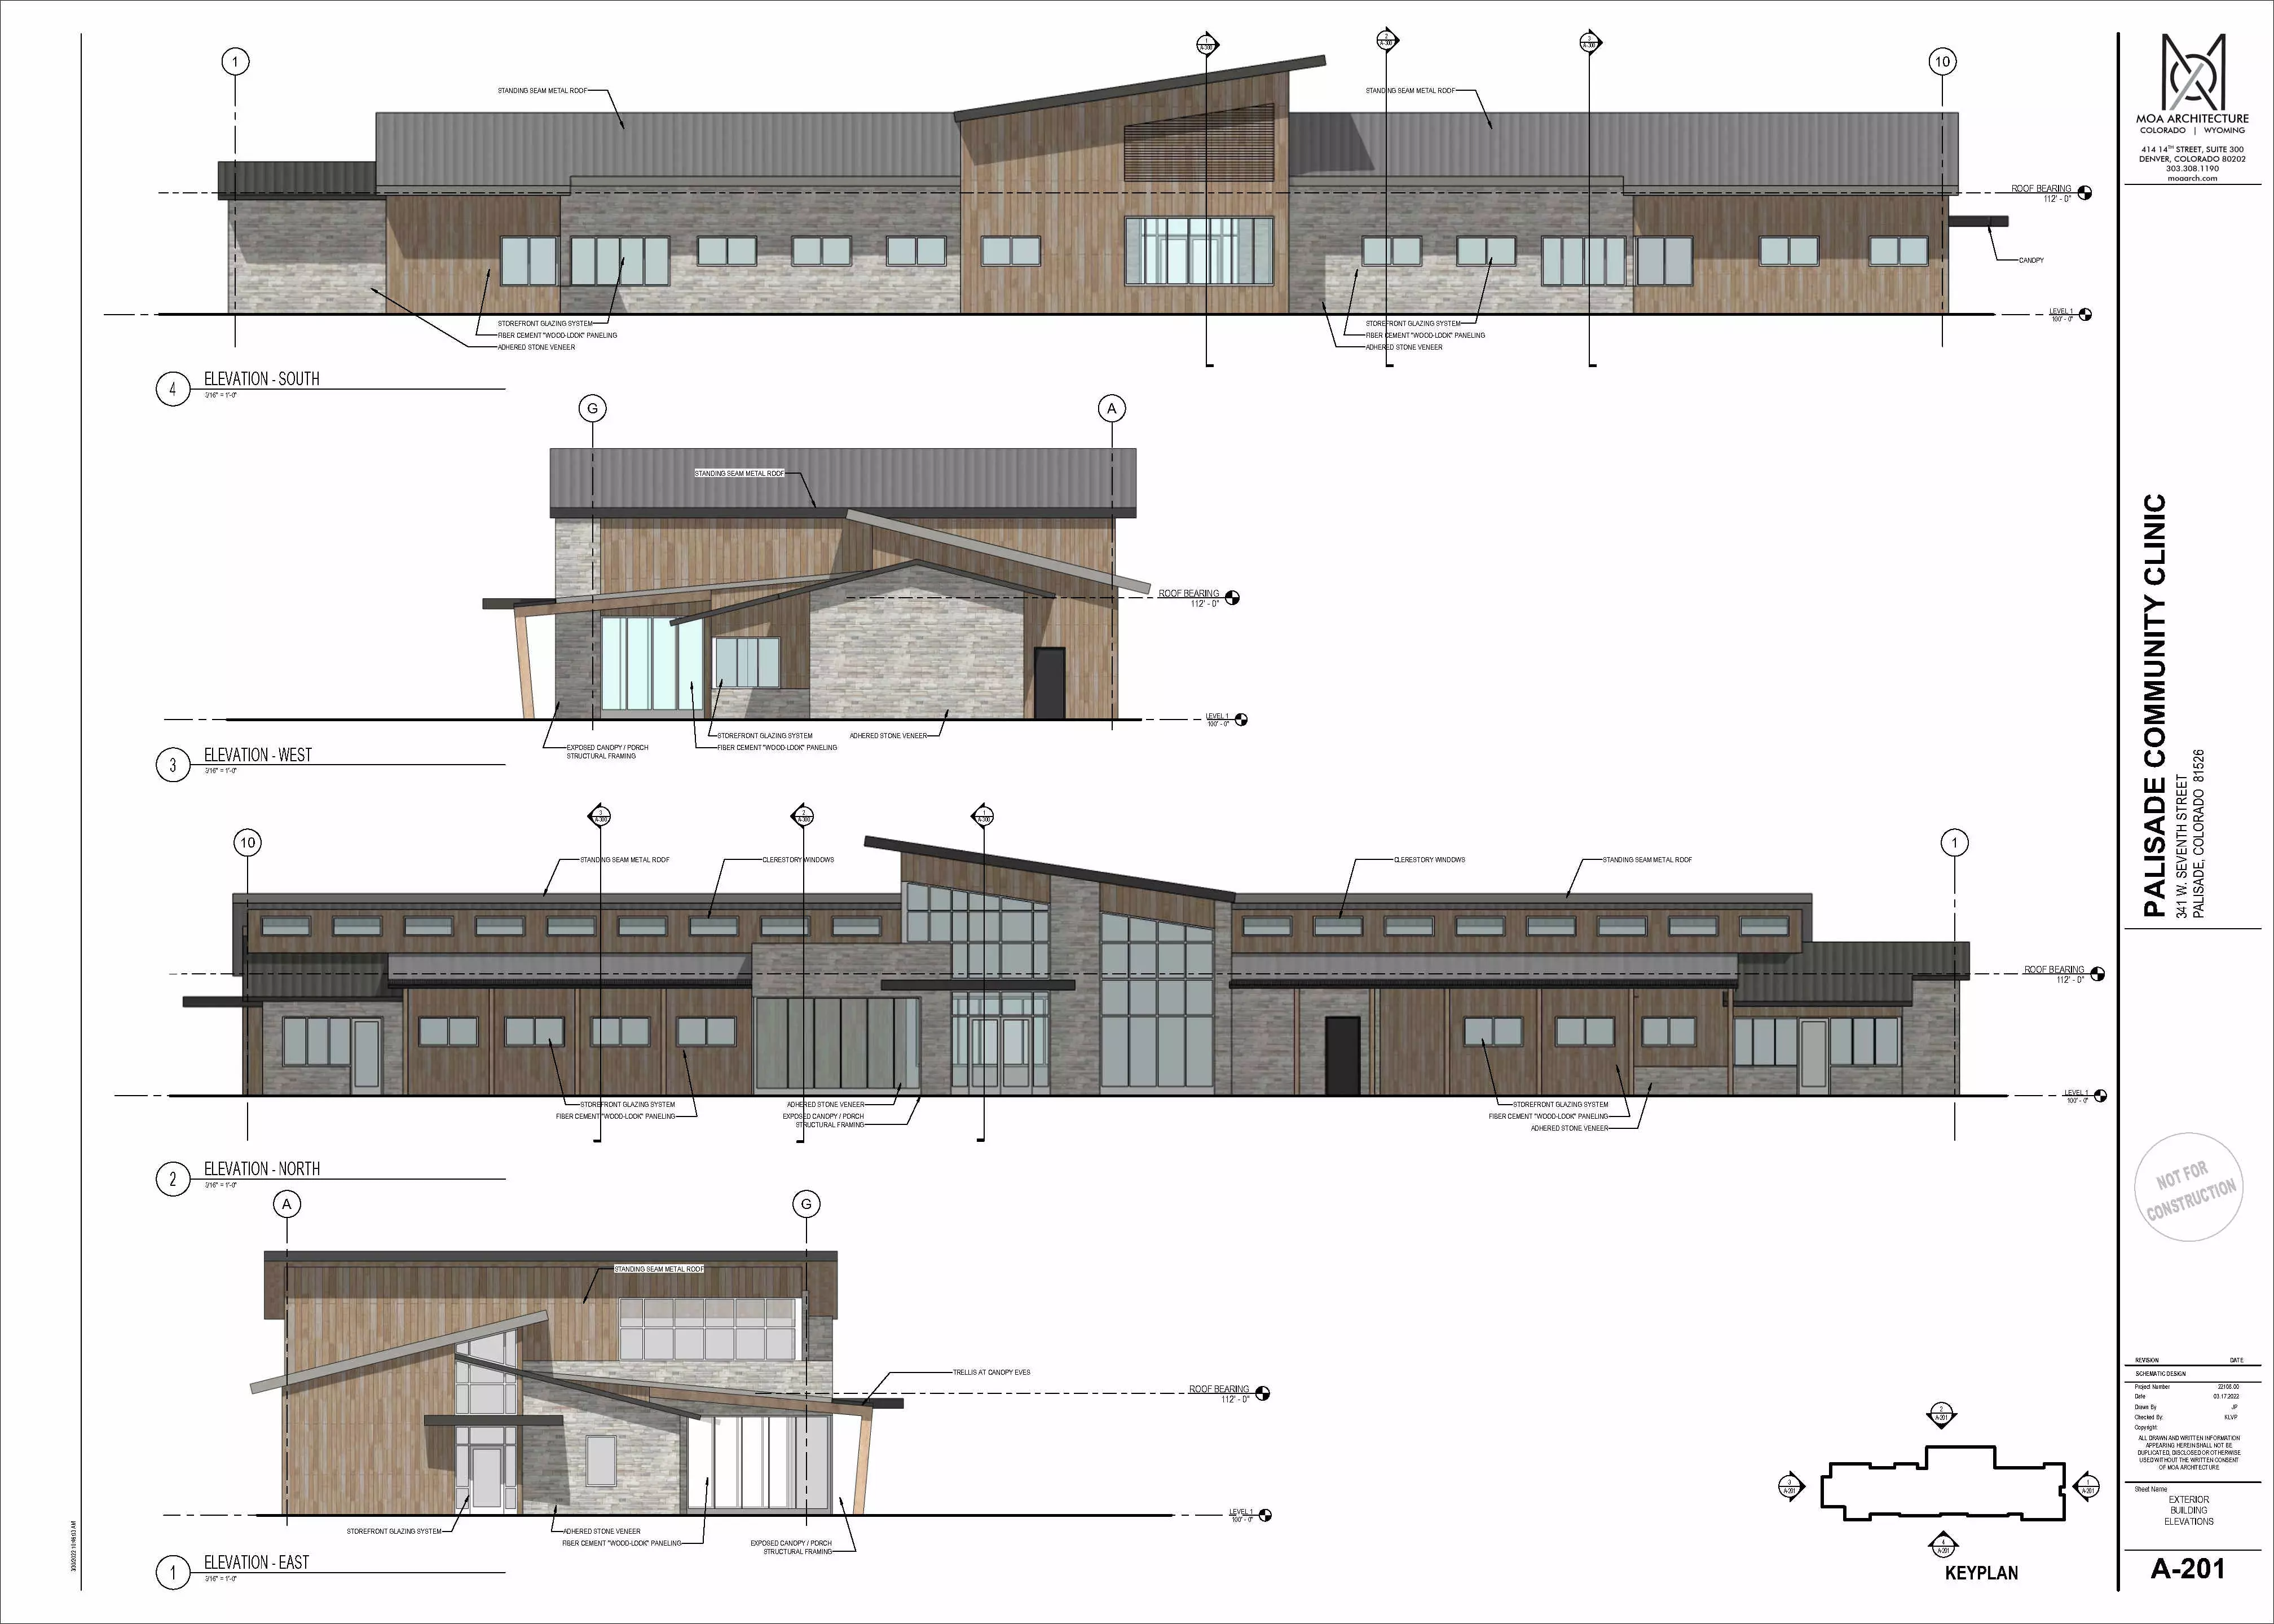 PALISADE CLINIC ELEVATIONS - 2022